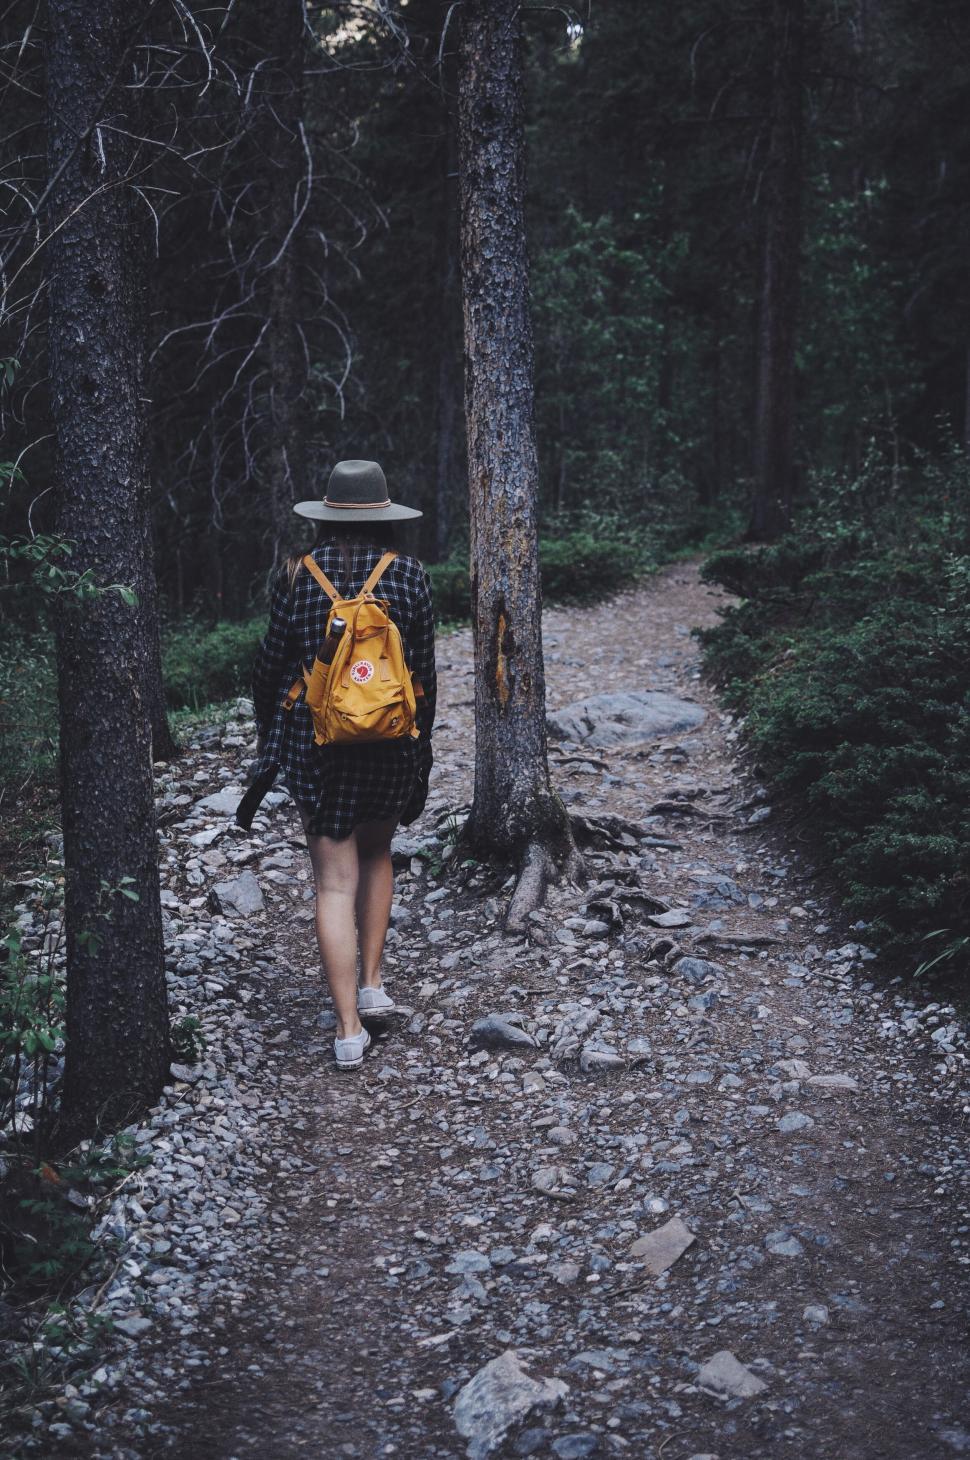 Free Image of Person hiking in forest with yellow backpack 